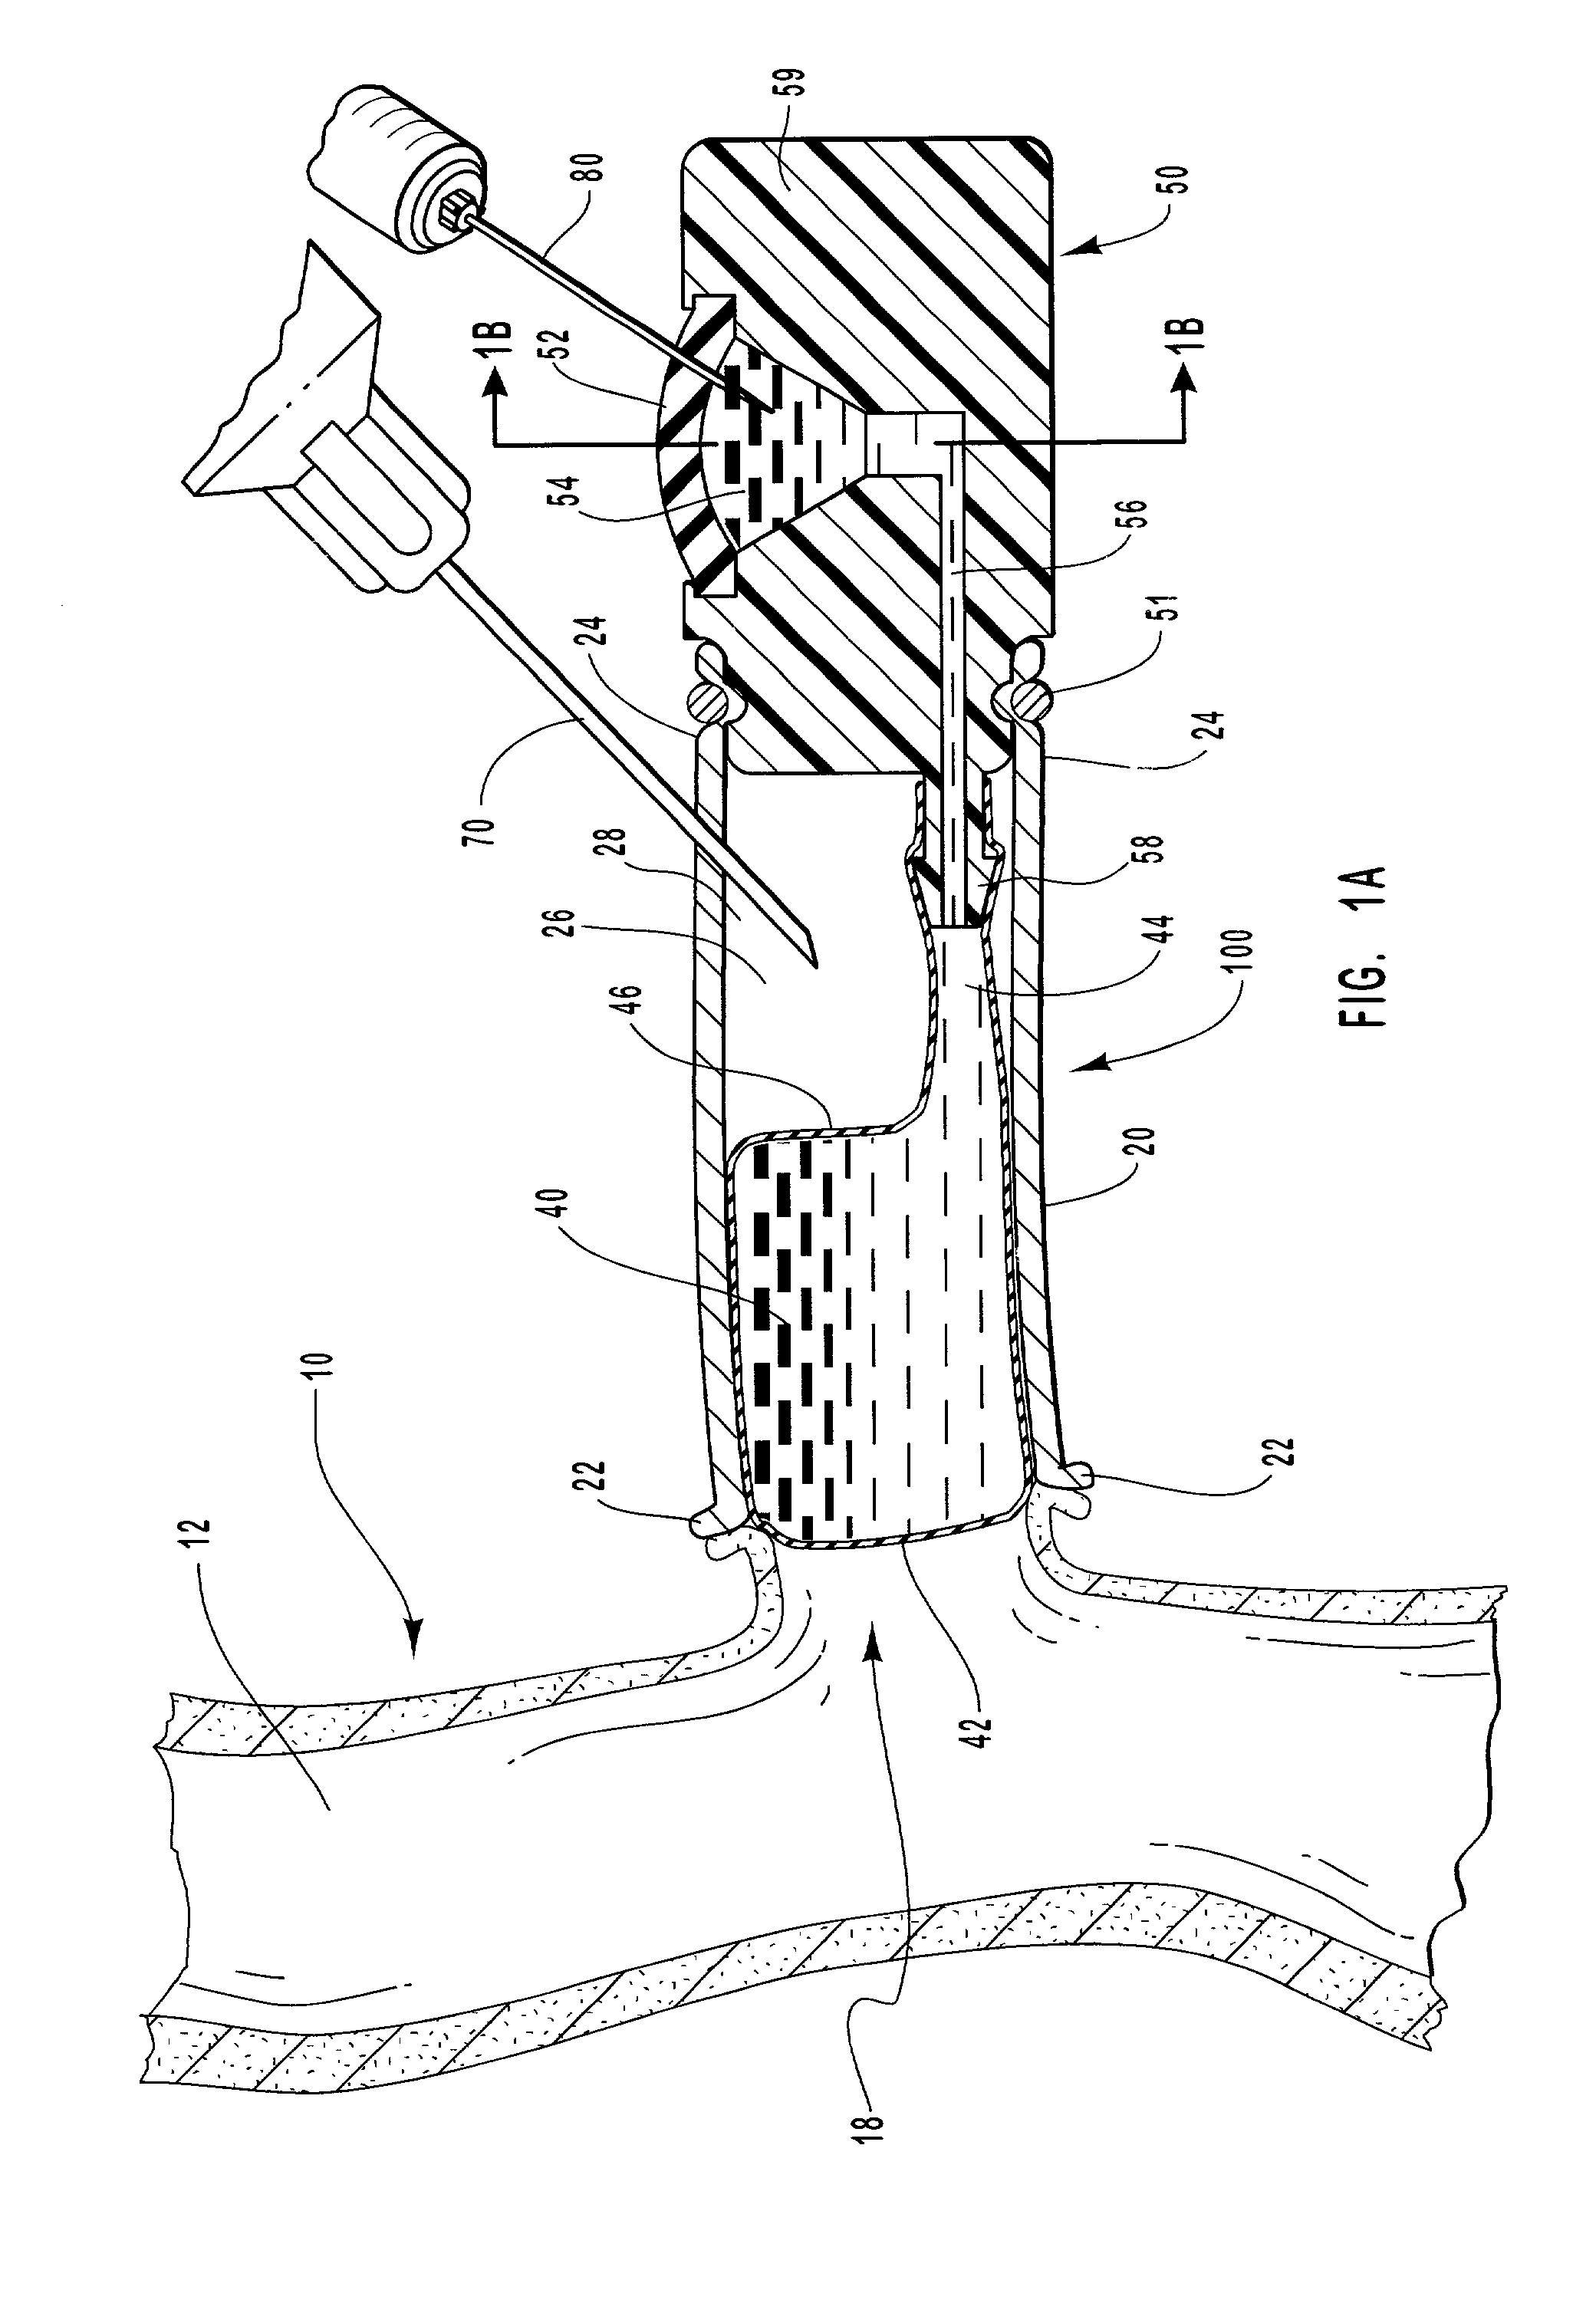 Vascular occlusal balloons and related vascular access devices and systems